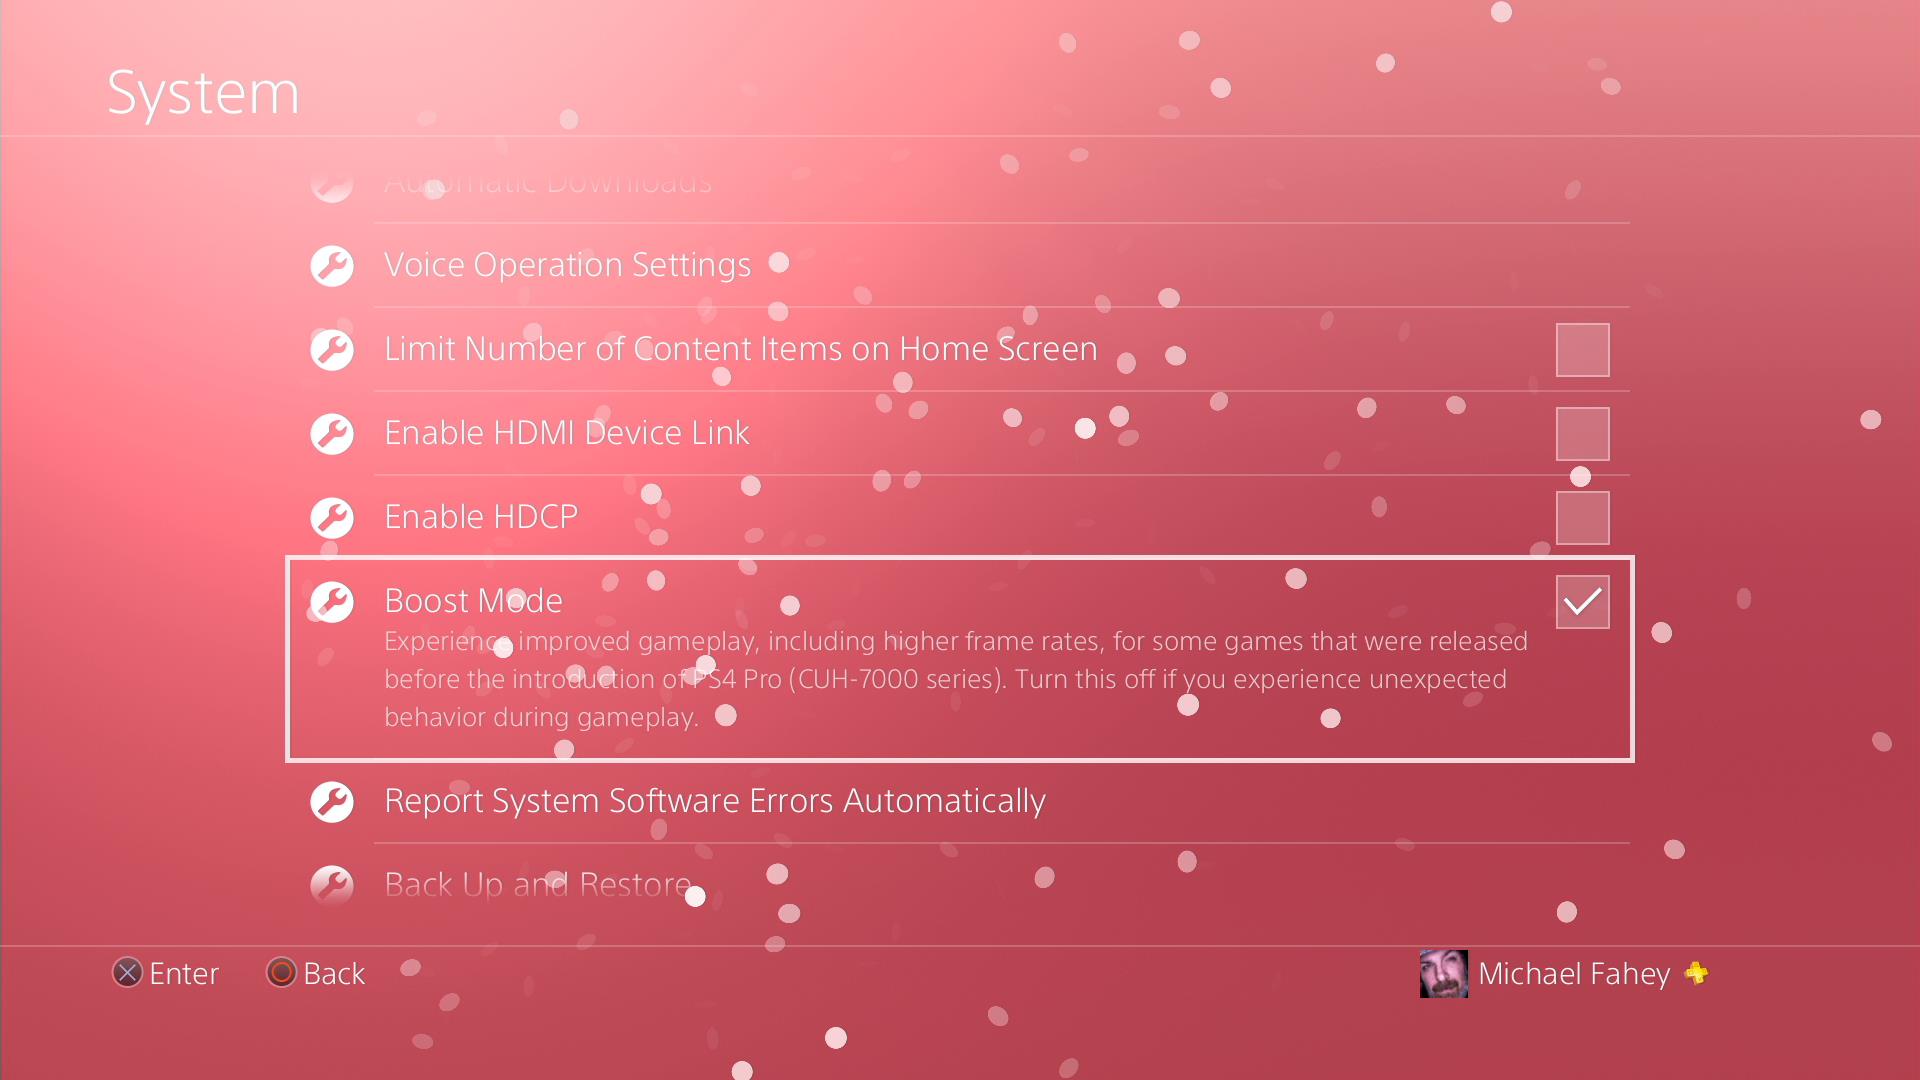 External Drives And Other Cool Stuff In The New PS4 Update